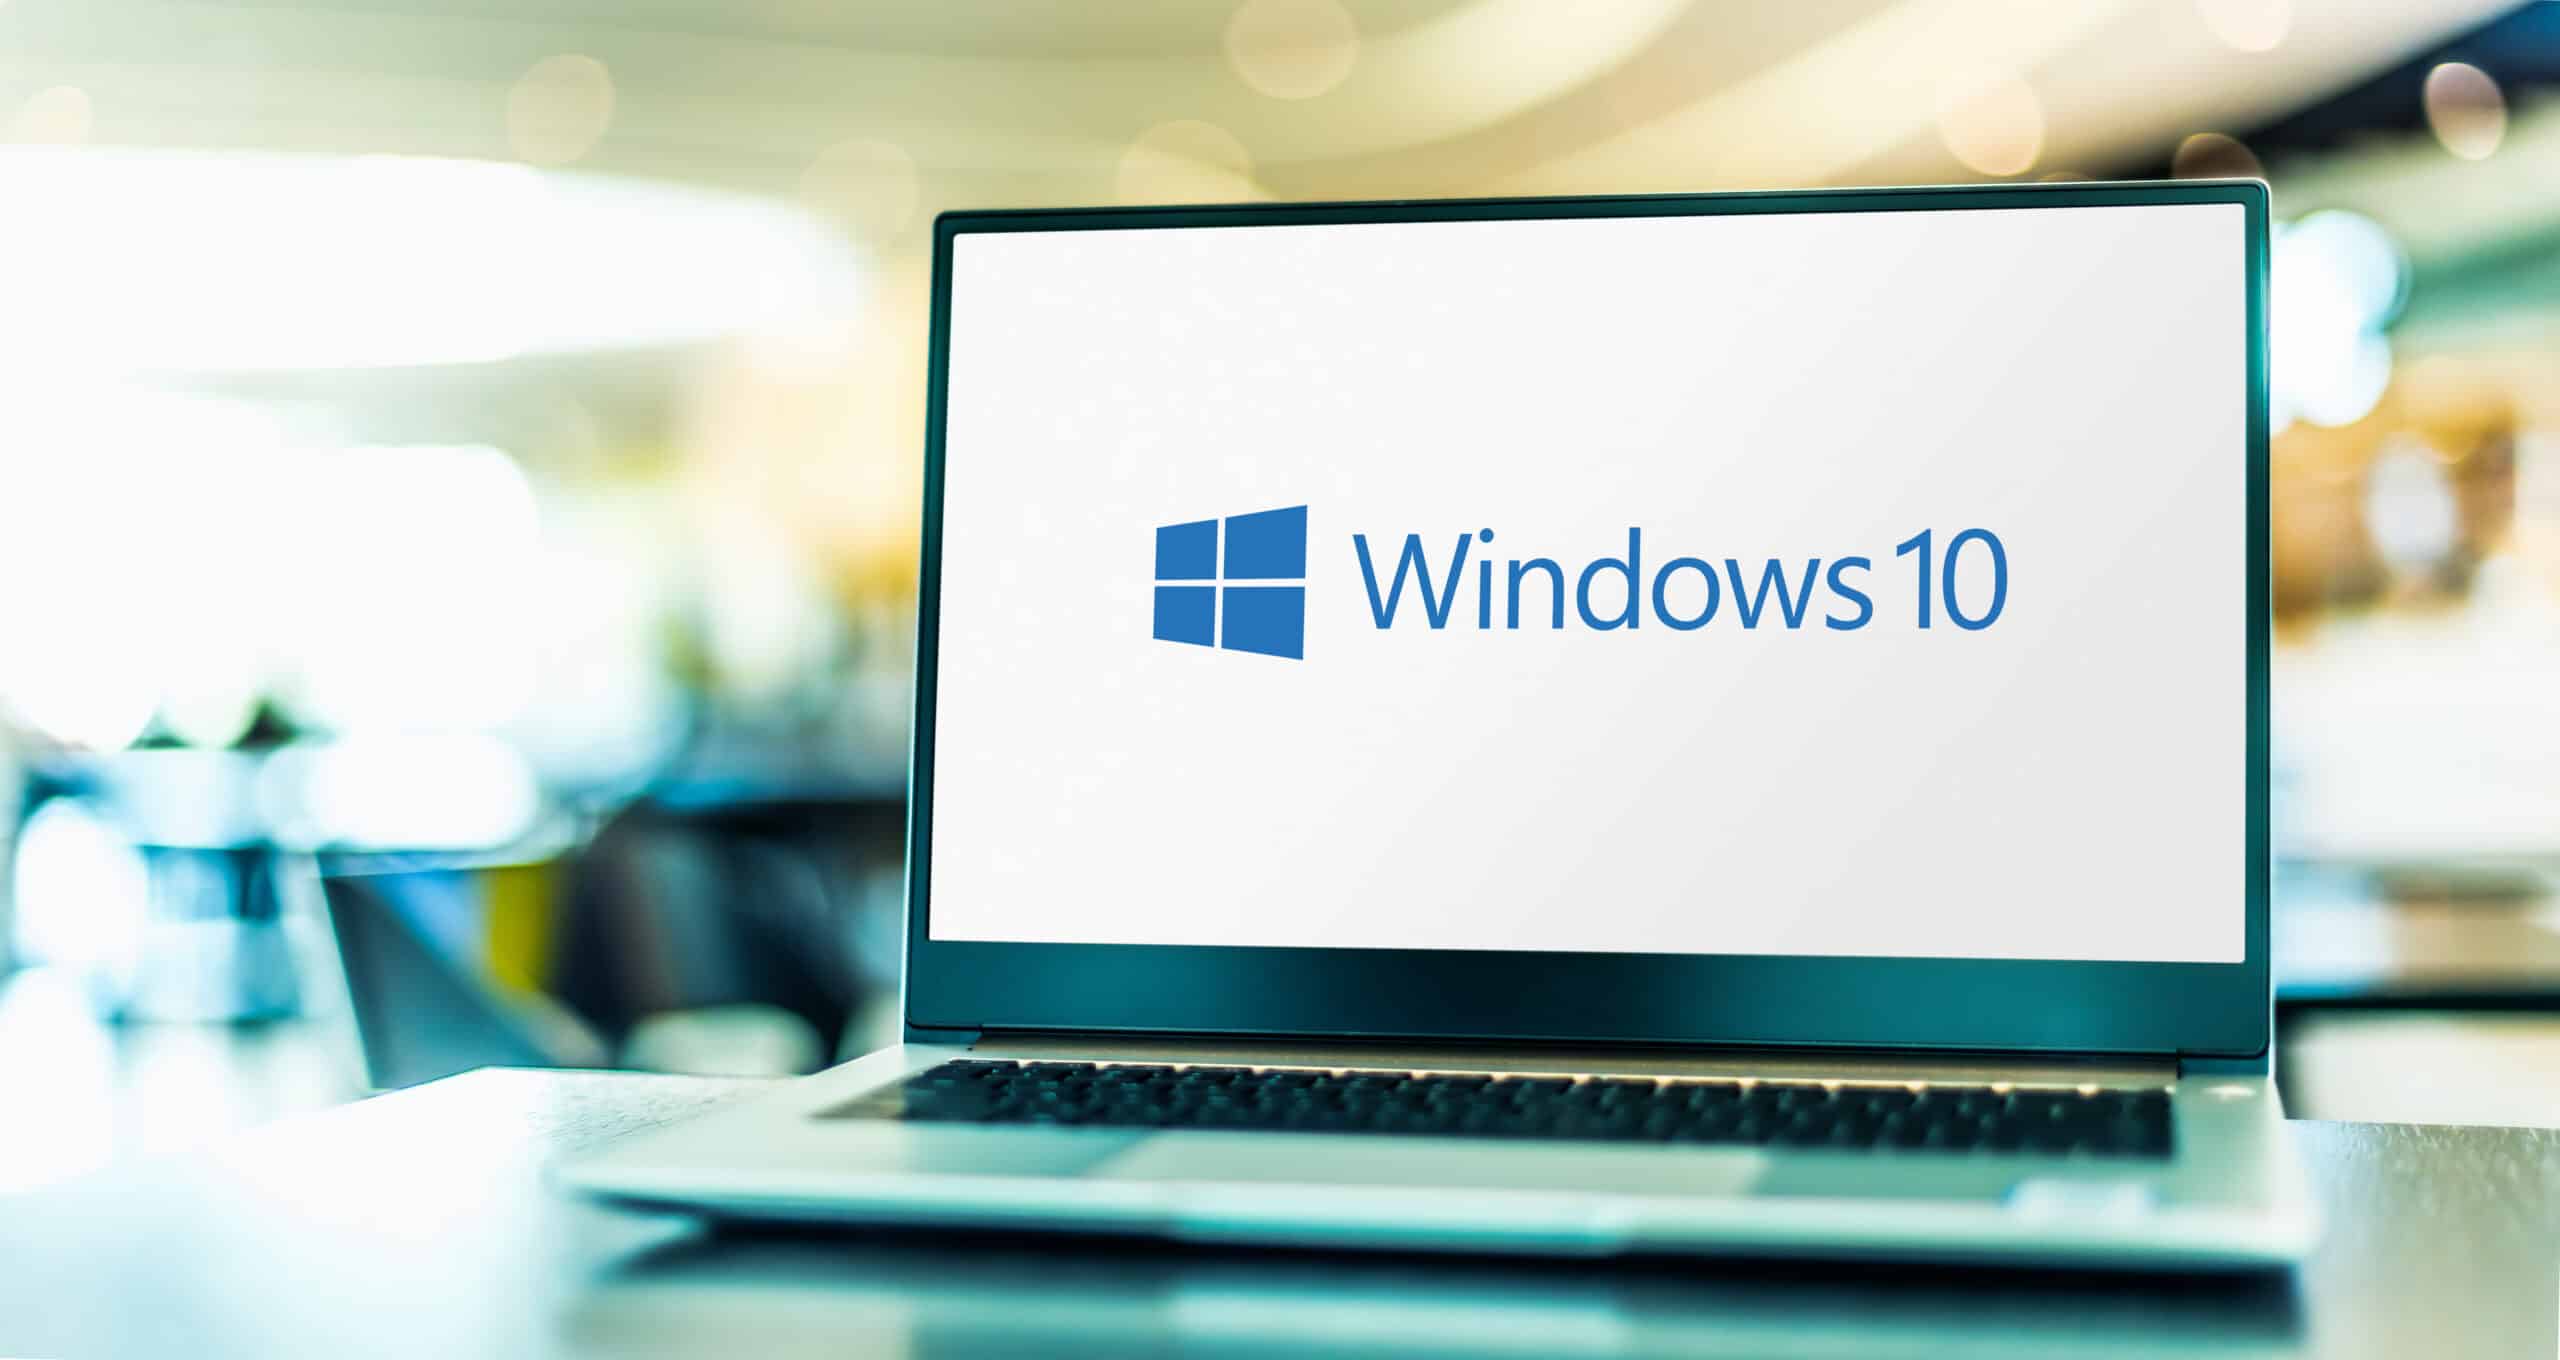 How To Change Wireless Security Settings On Windows 10